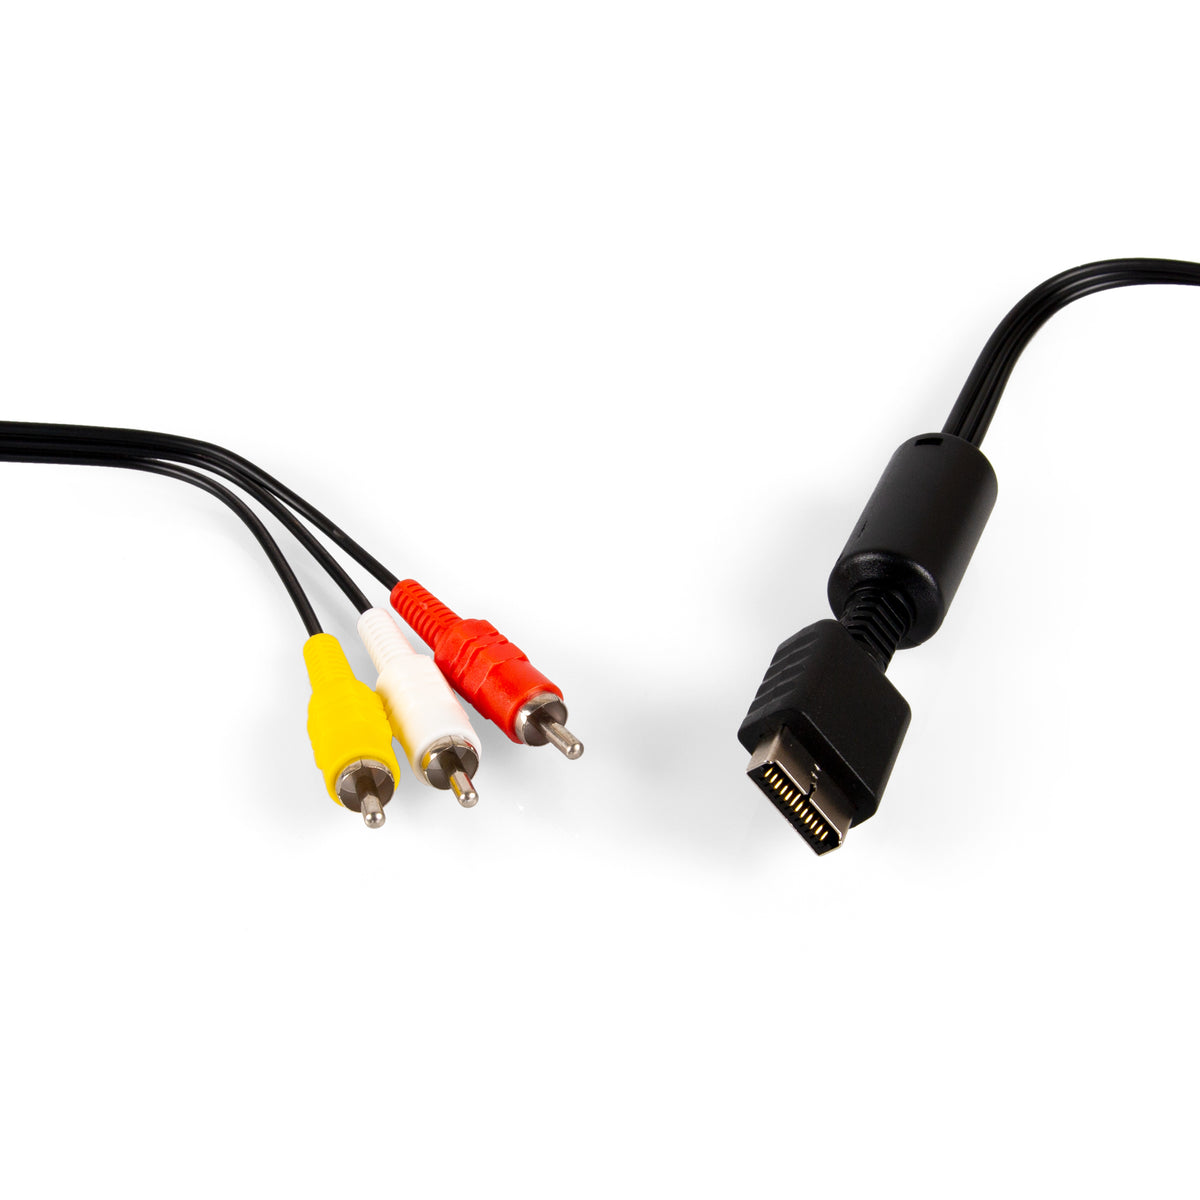 AV Composite Cable
For Sony PS1® / PS2® / PS3®